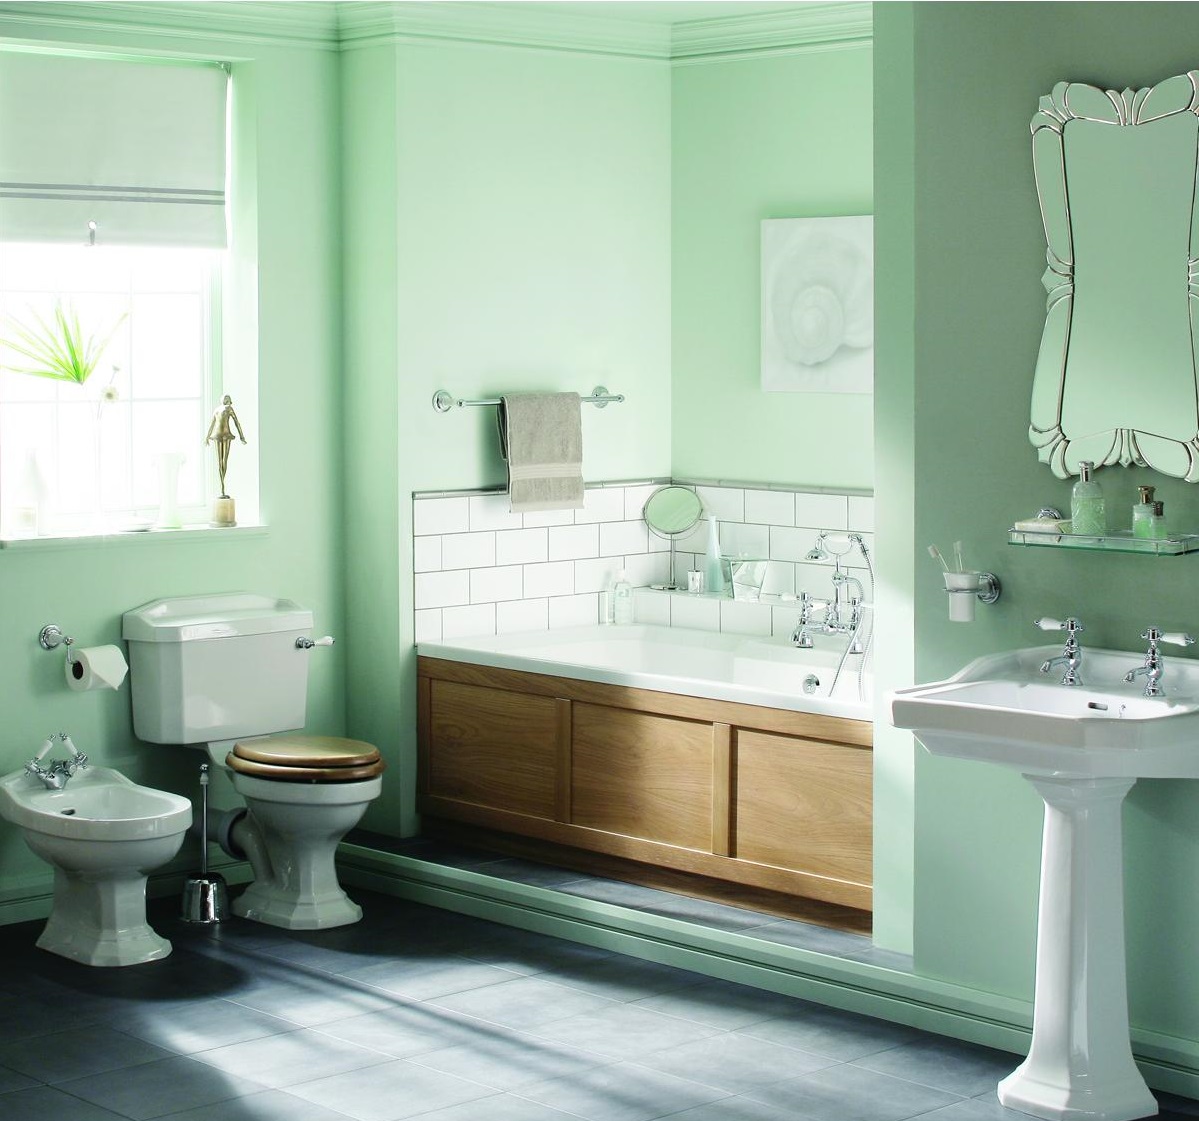 Modern Bathroom Bathroom Astonishing Modern Bathroom Applying Cyan Bathroom Paint Ideas Installed With Pedestal Sink Also Urinal And Toilet Seat And Completed With Bathtub Using Claw Handle Faucet Bathroom The Great Advantages Of Bathroom Paint Ideas